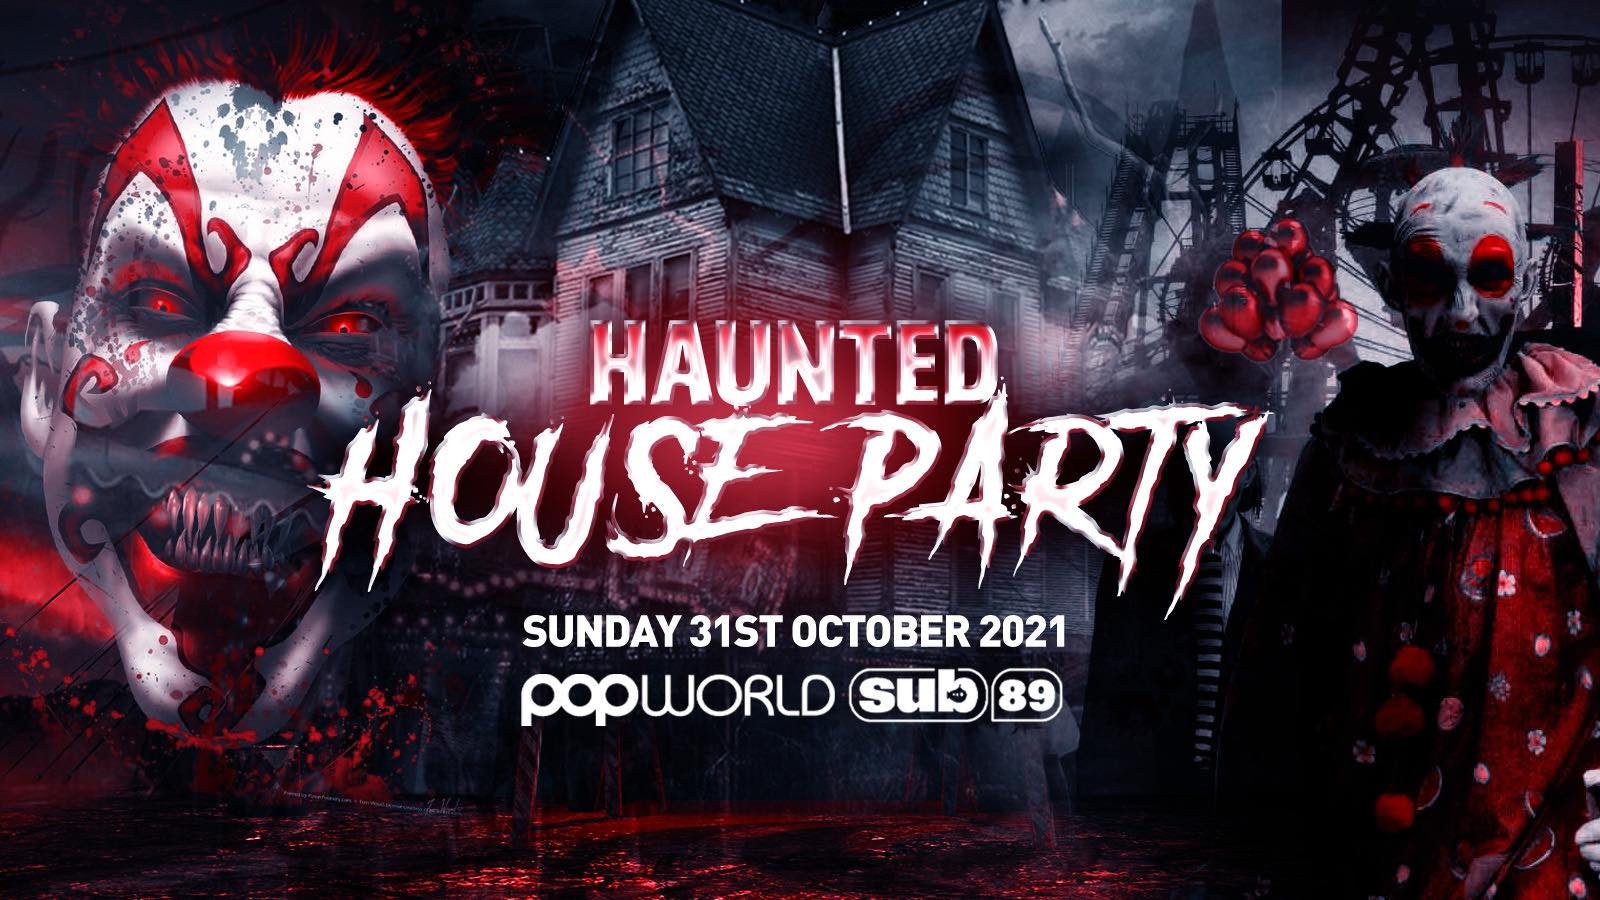 The Haunted House Party | Reading Halloween 2021 – LAST 100 TICKETS!